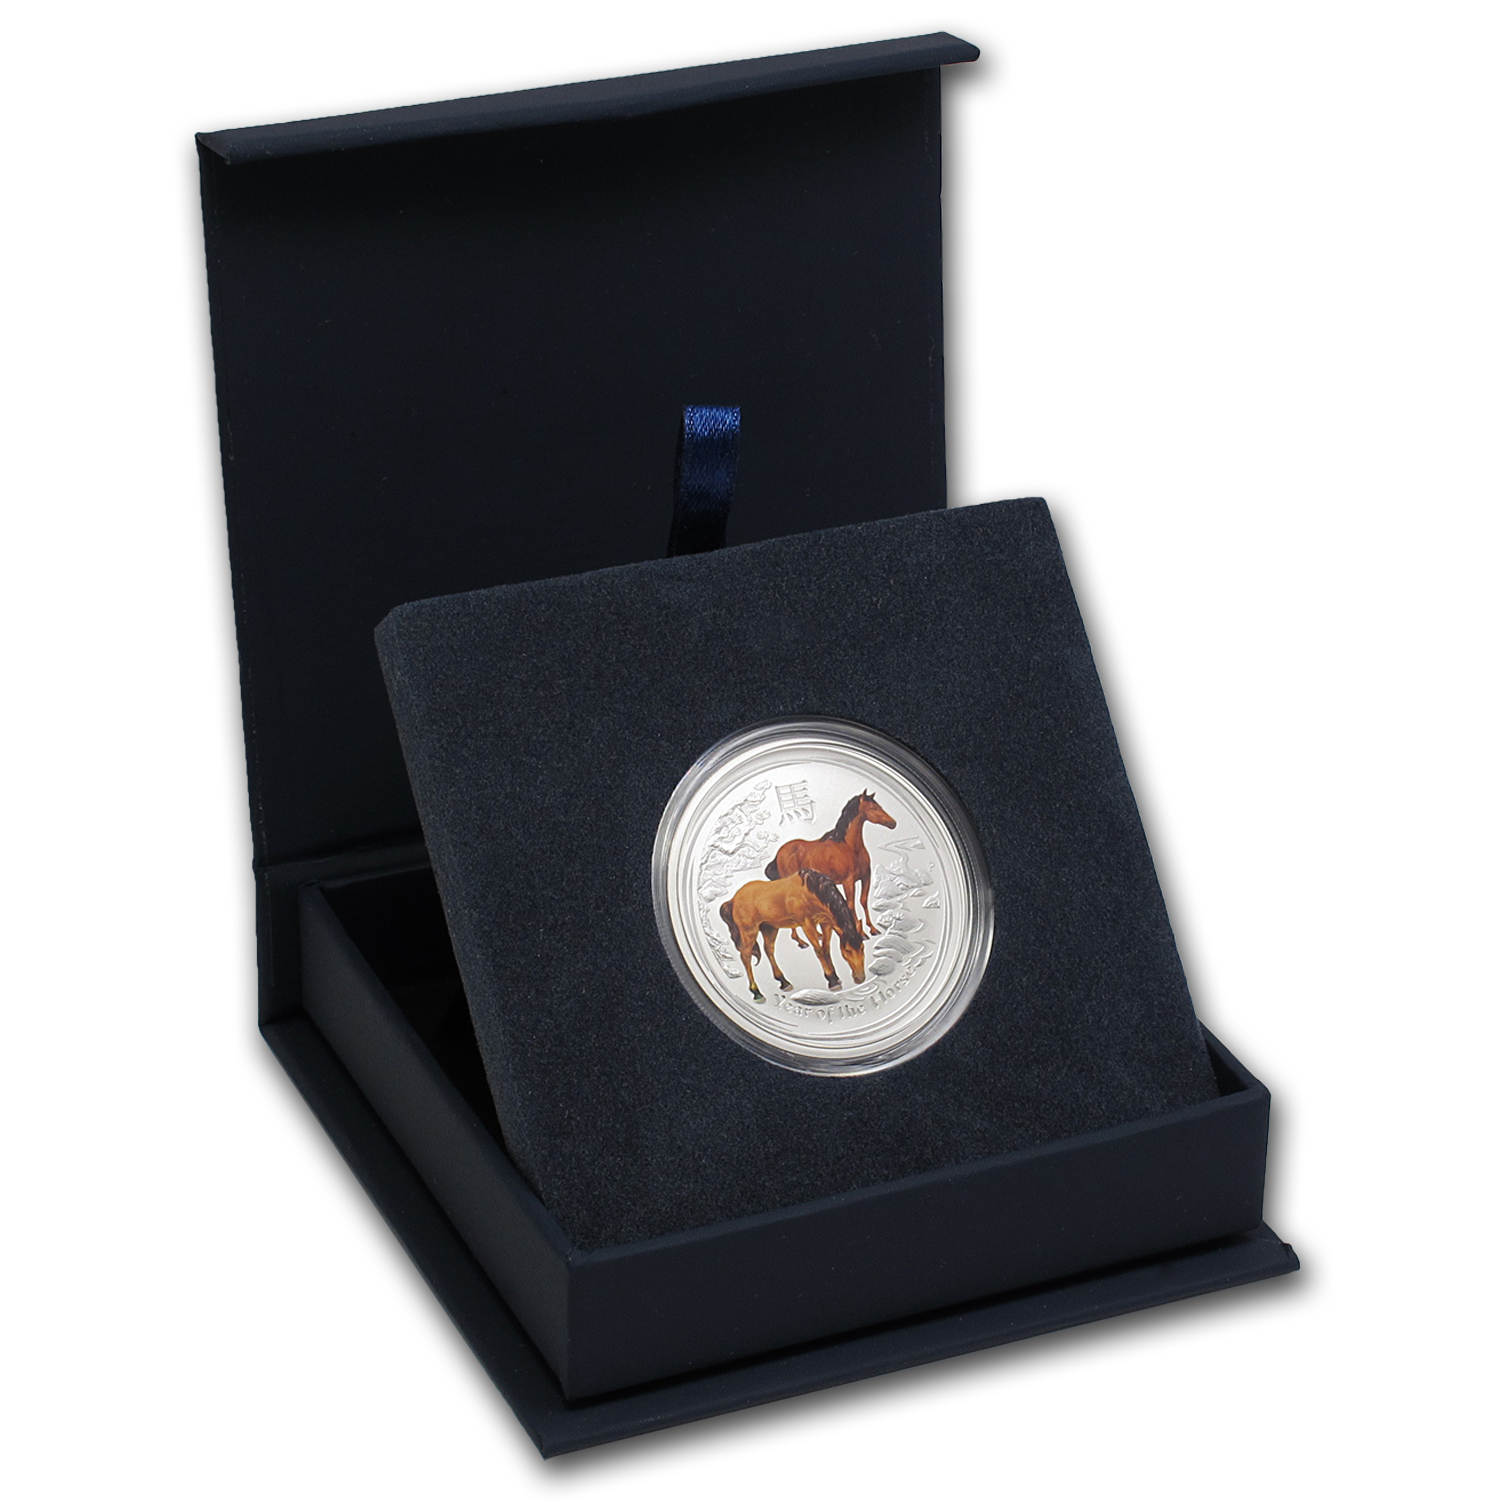 Buy APMEX Gift Box - 1/2 oz Perth Mint Silver Coin Series 2 - Click Image to Close